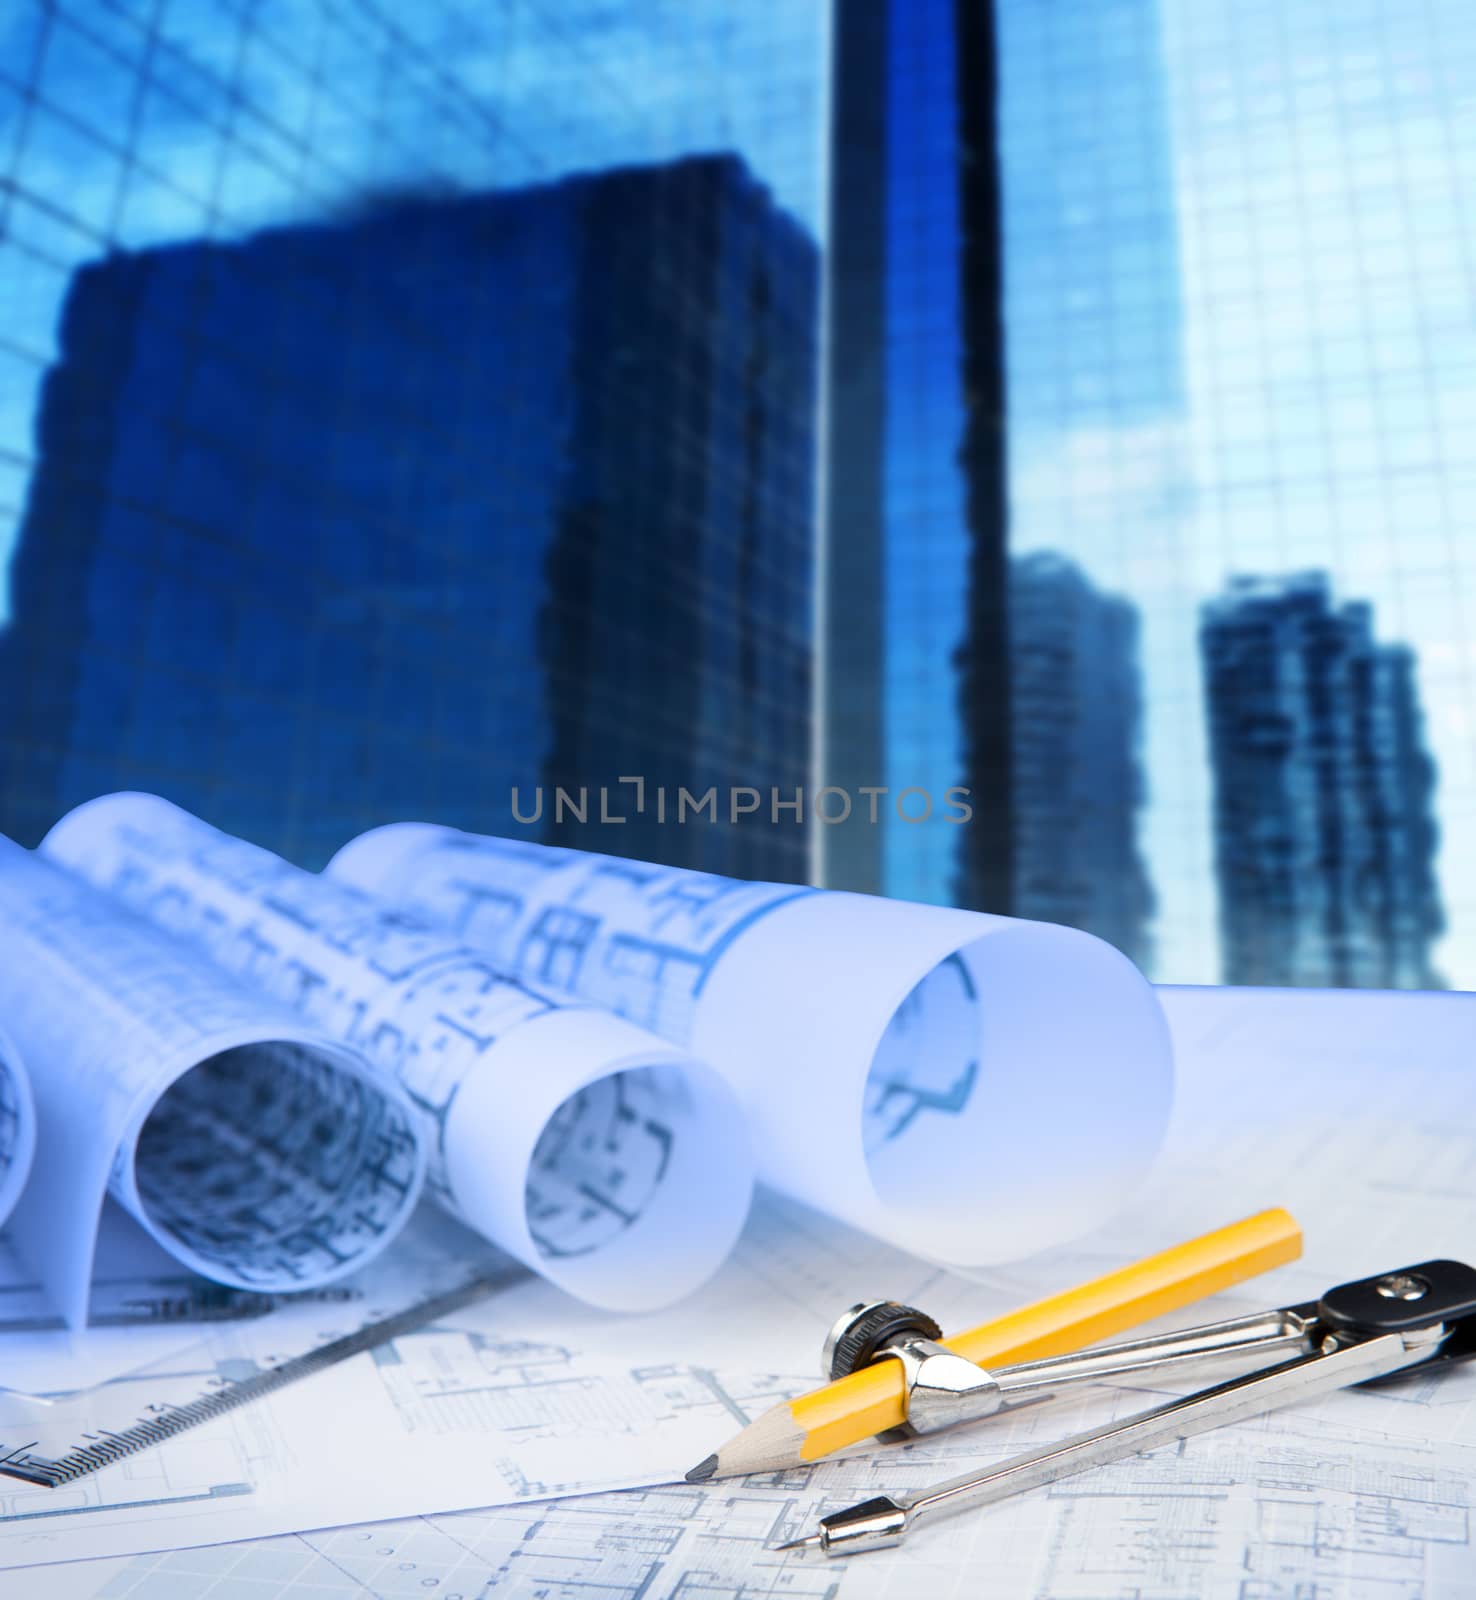 compass pencil blue print and office building in background by khunaspix